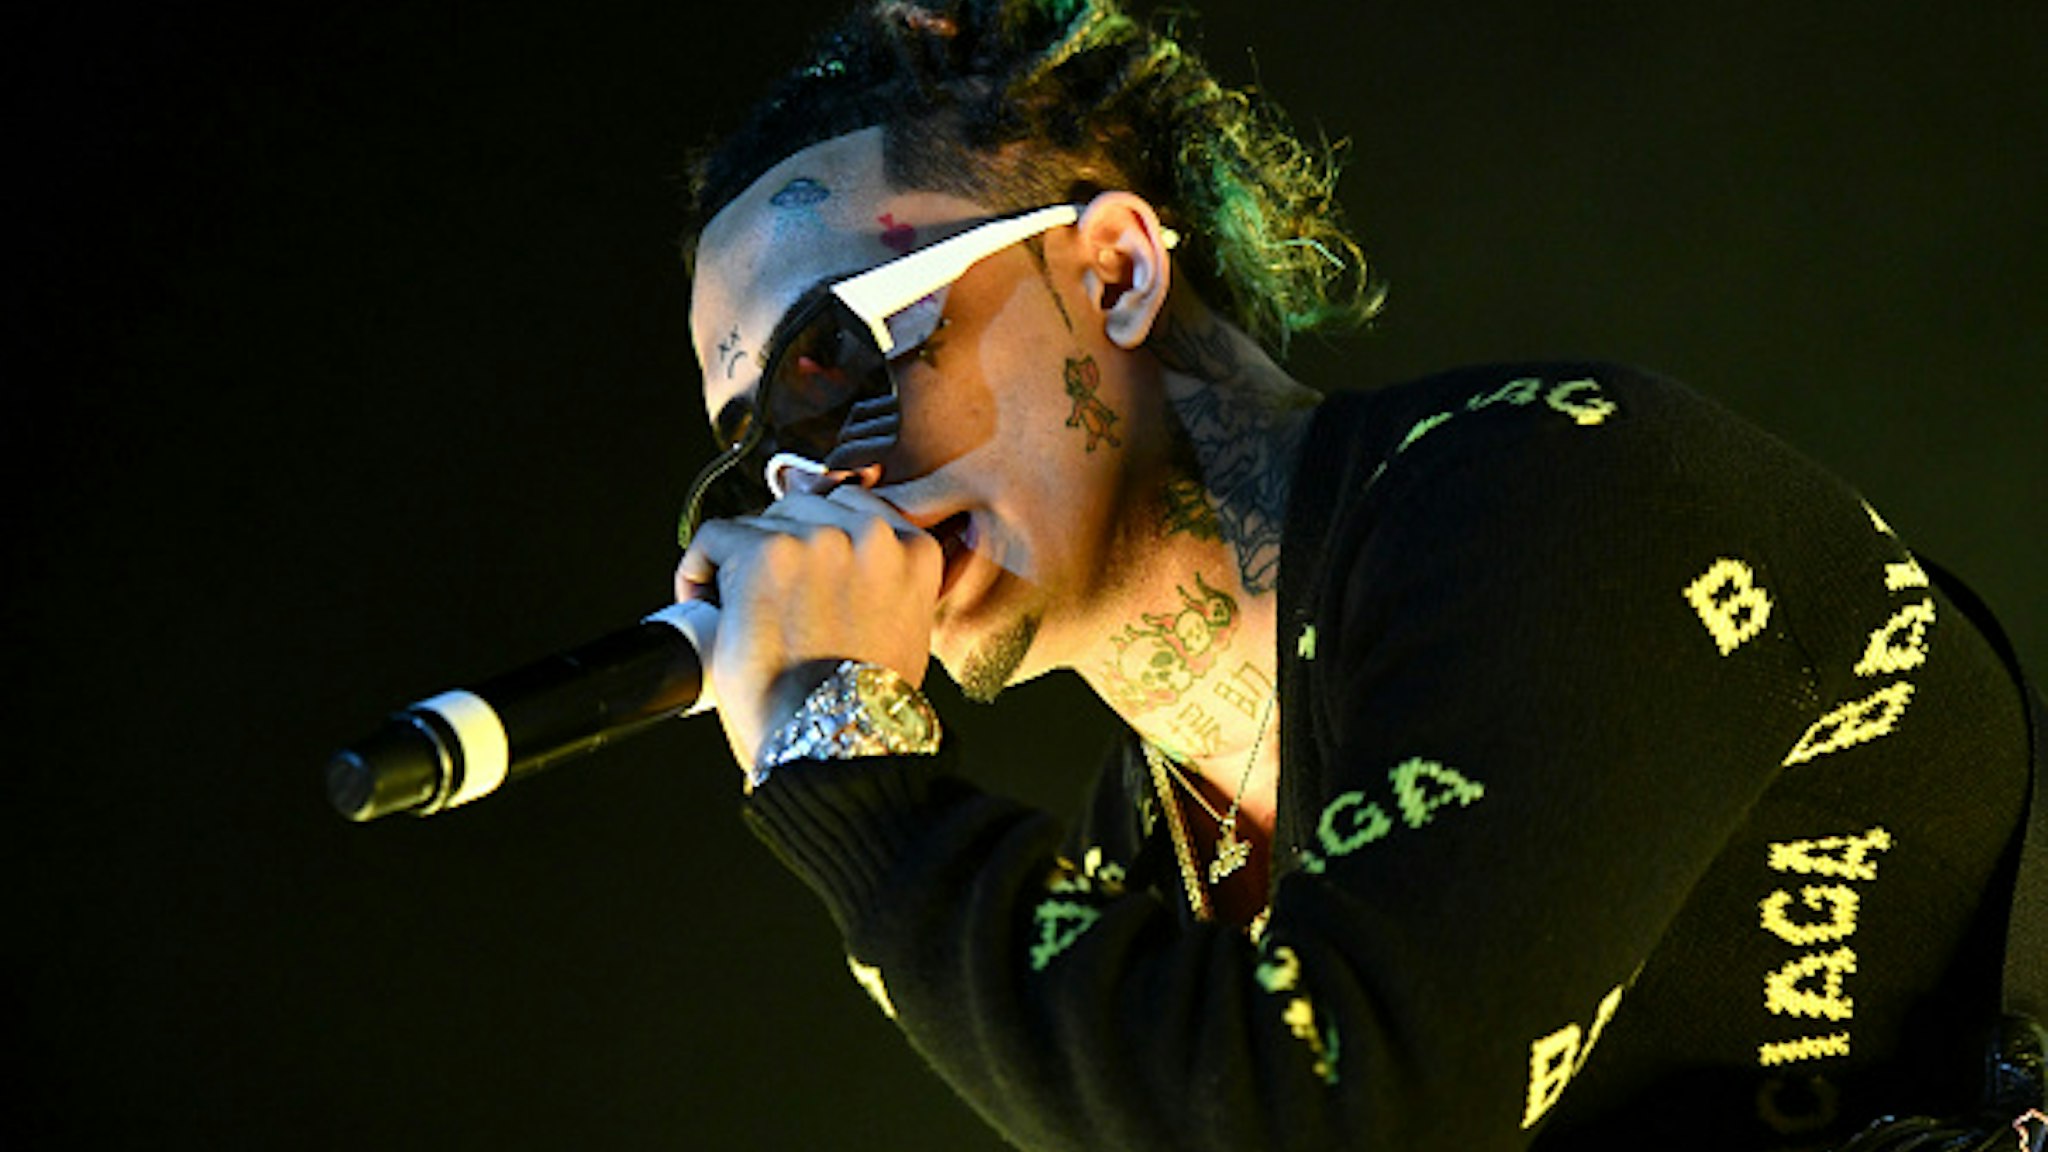 LOS ANGELES, CALIFORNIA - DECEMBER 14: Rapper Lil Pump performs onstage during day 1 of the Rolling Loud Festival at Banc of California Stadium on December 14, 2019 in Los Angeles, California.